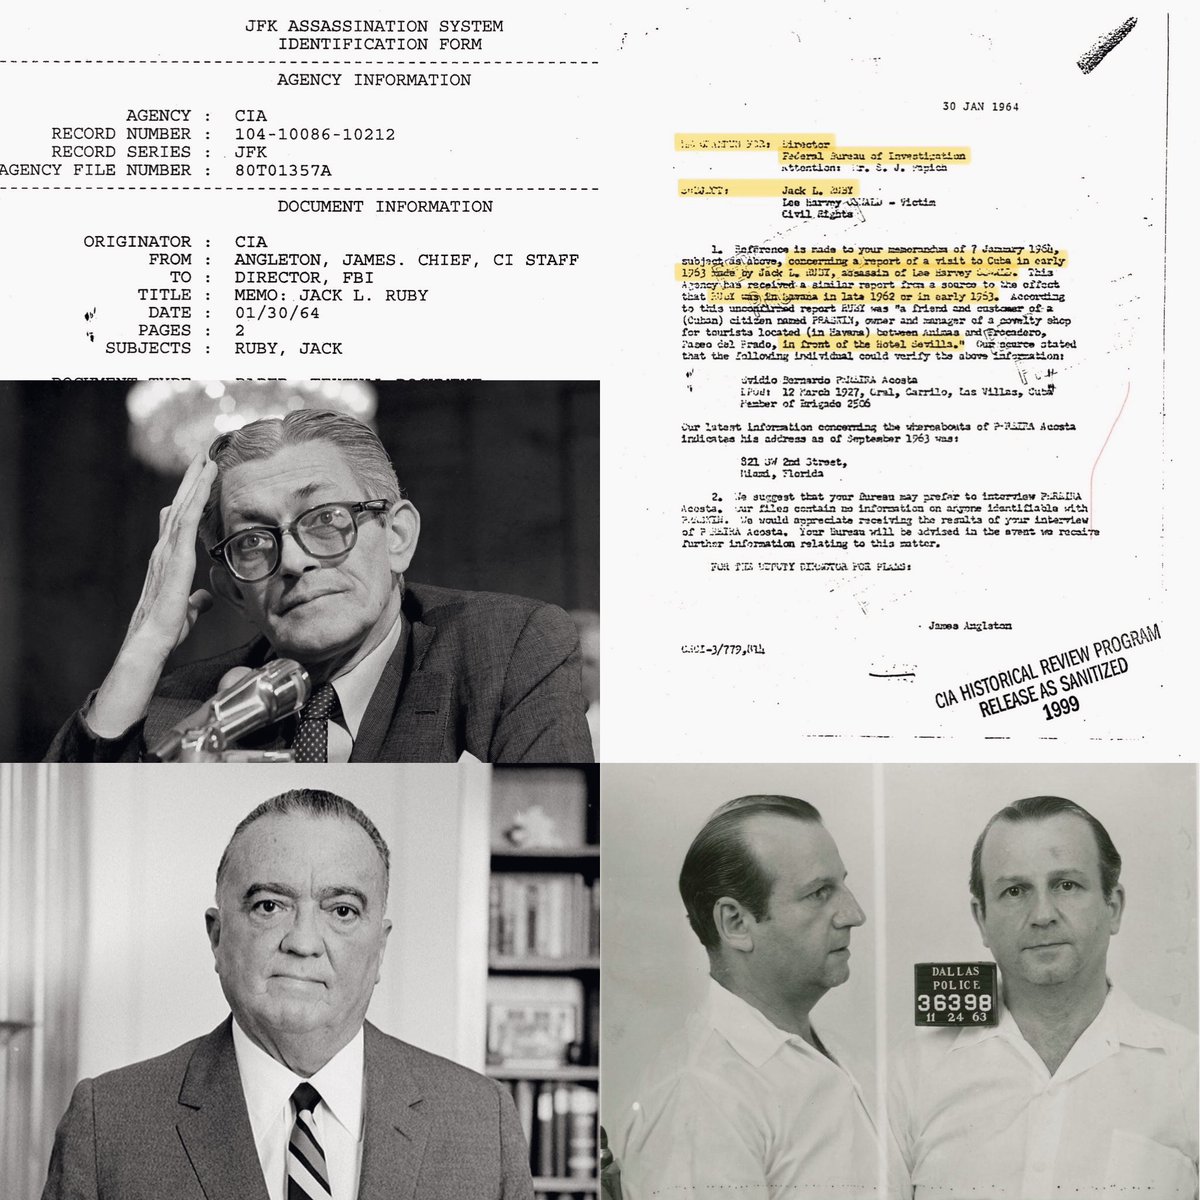 James Angleton, head of CIA Counterintelligence, sends a memo to FBI Director Hoover on 1/30/64 concerning reports that Jack Ruby had visited Cuba in late 1962 or early 1963. Ruby was seen at the Hotel Sevilla and its casino was closely associated with Havana's mafia network,